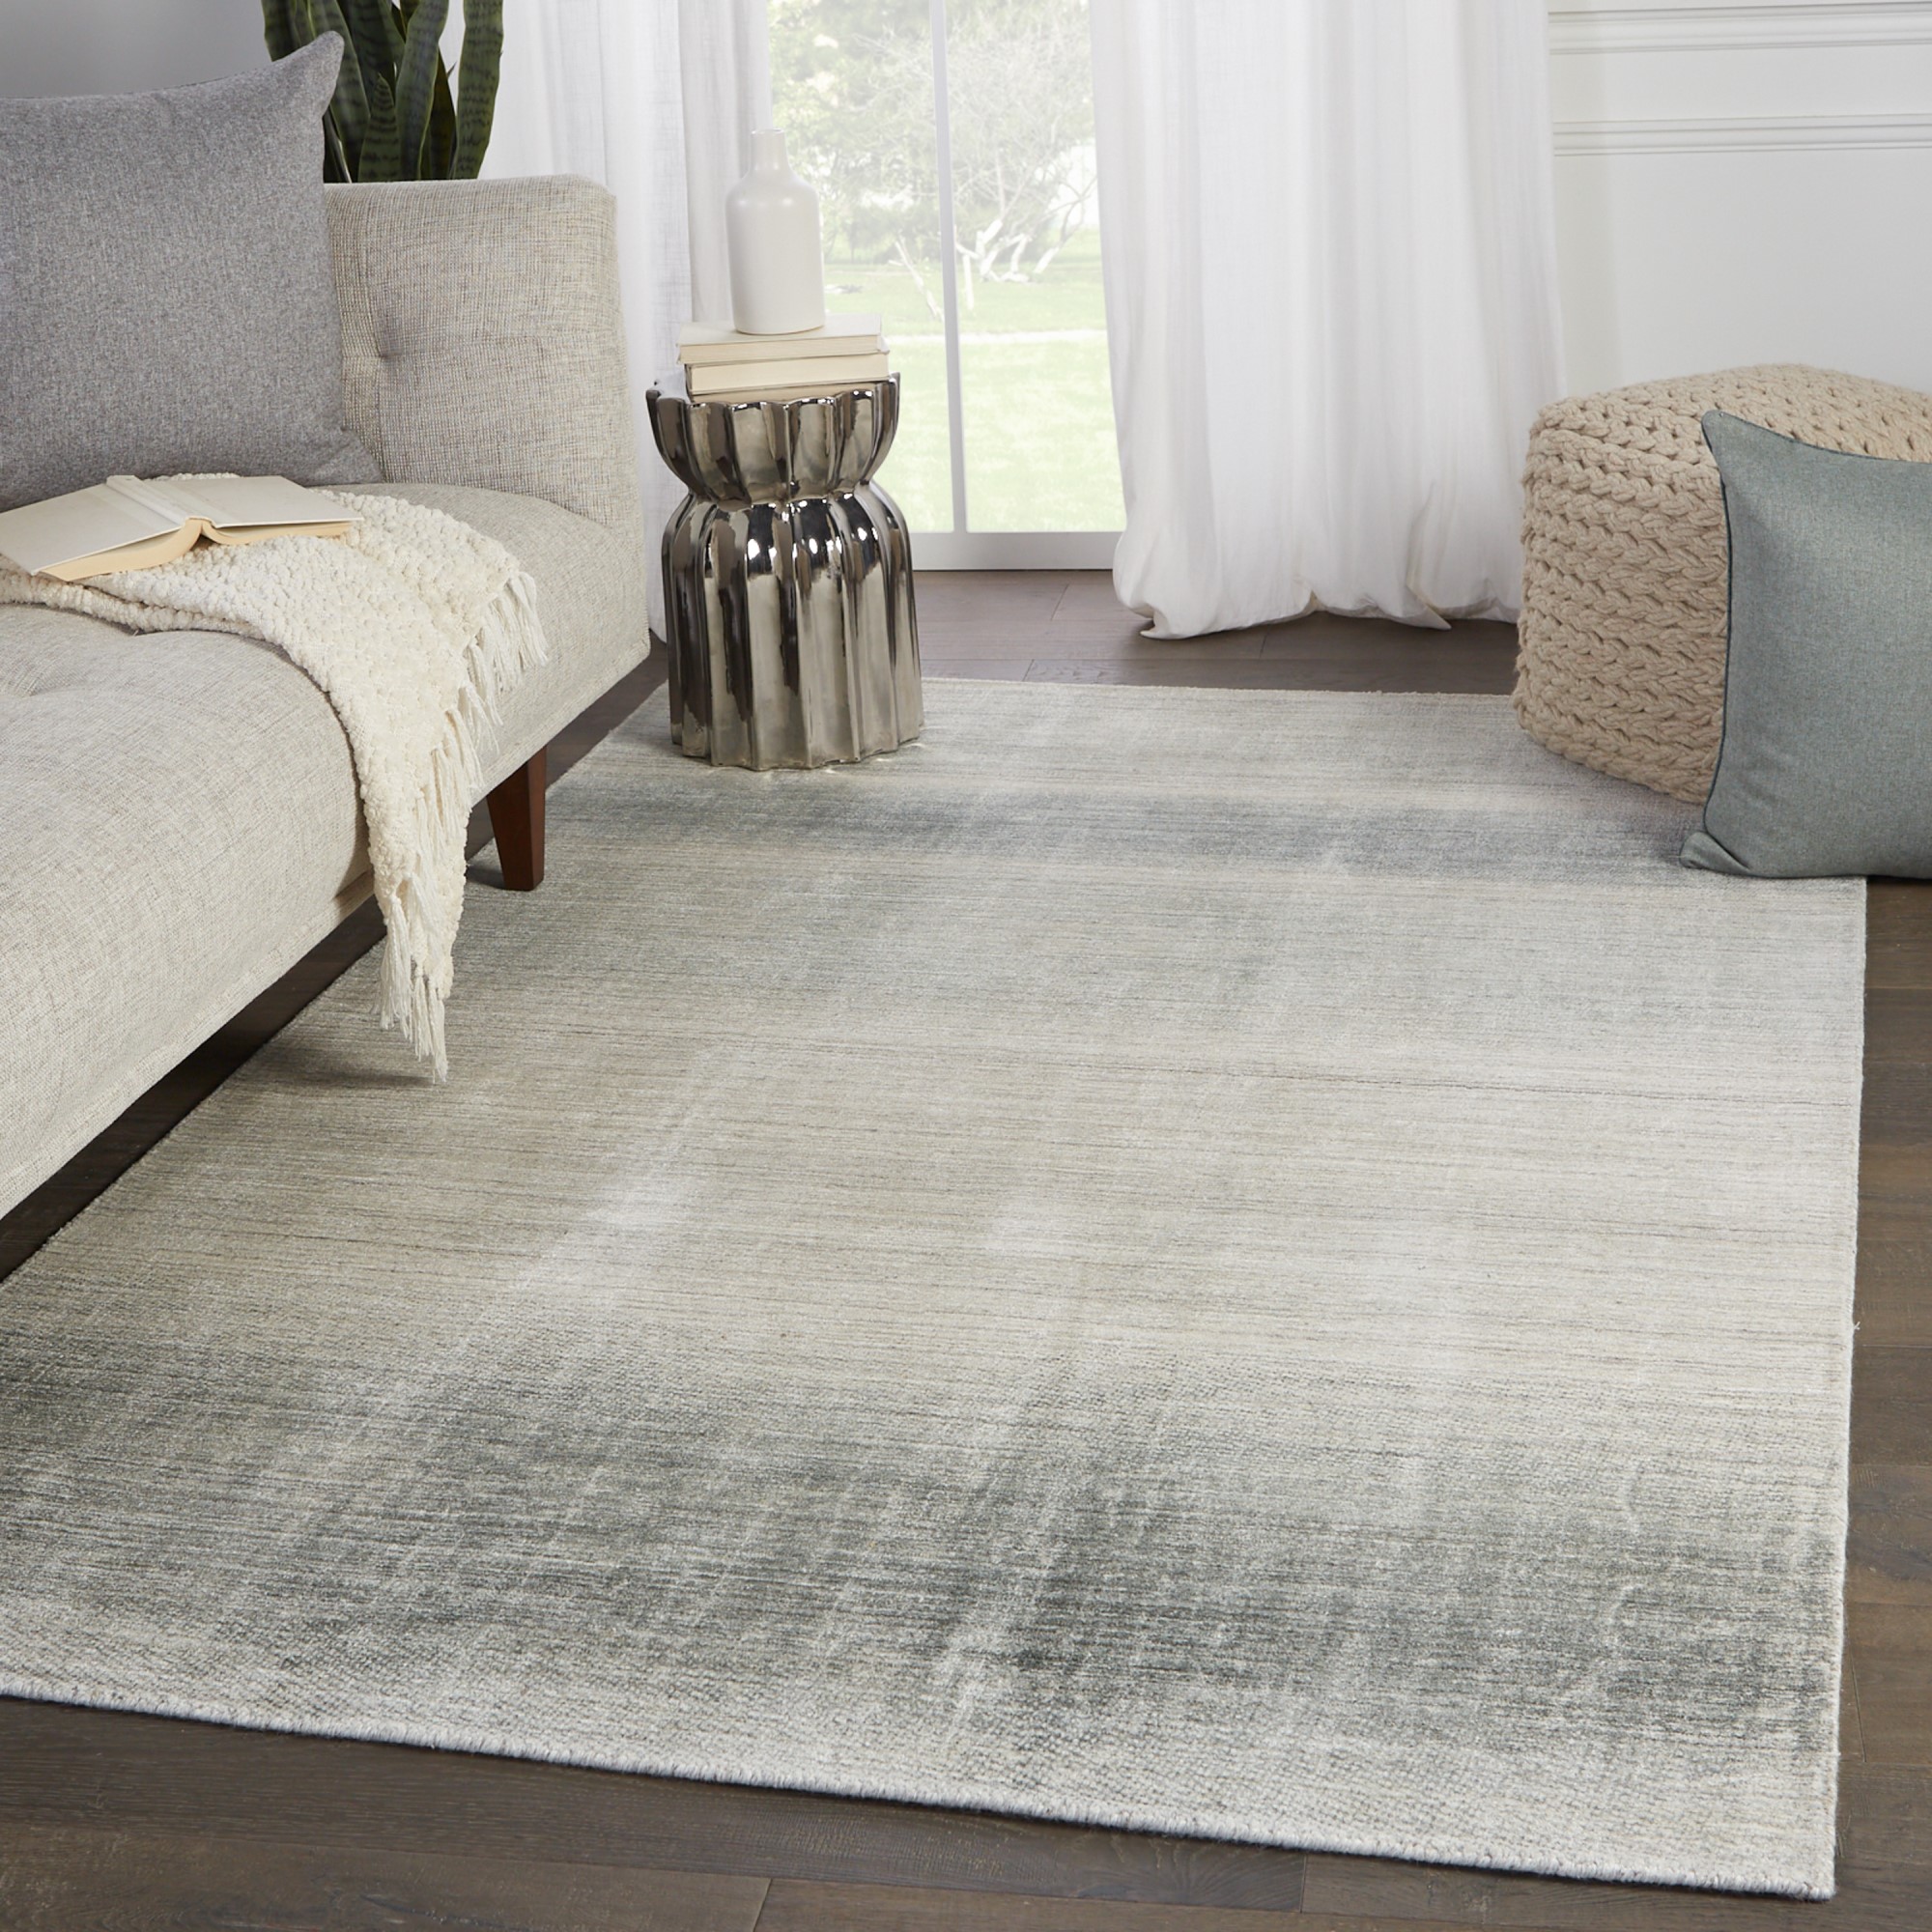 Barclay Butera By Jaipur Living Newport, Newport Rug Collection